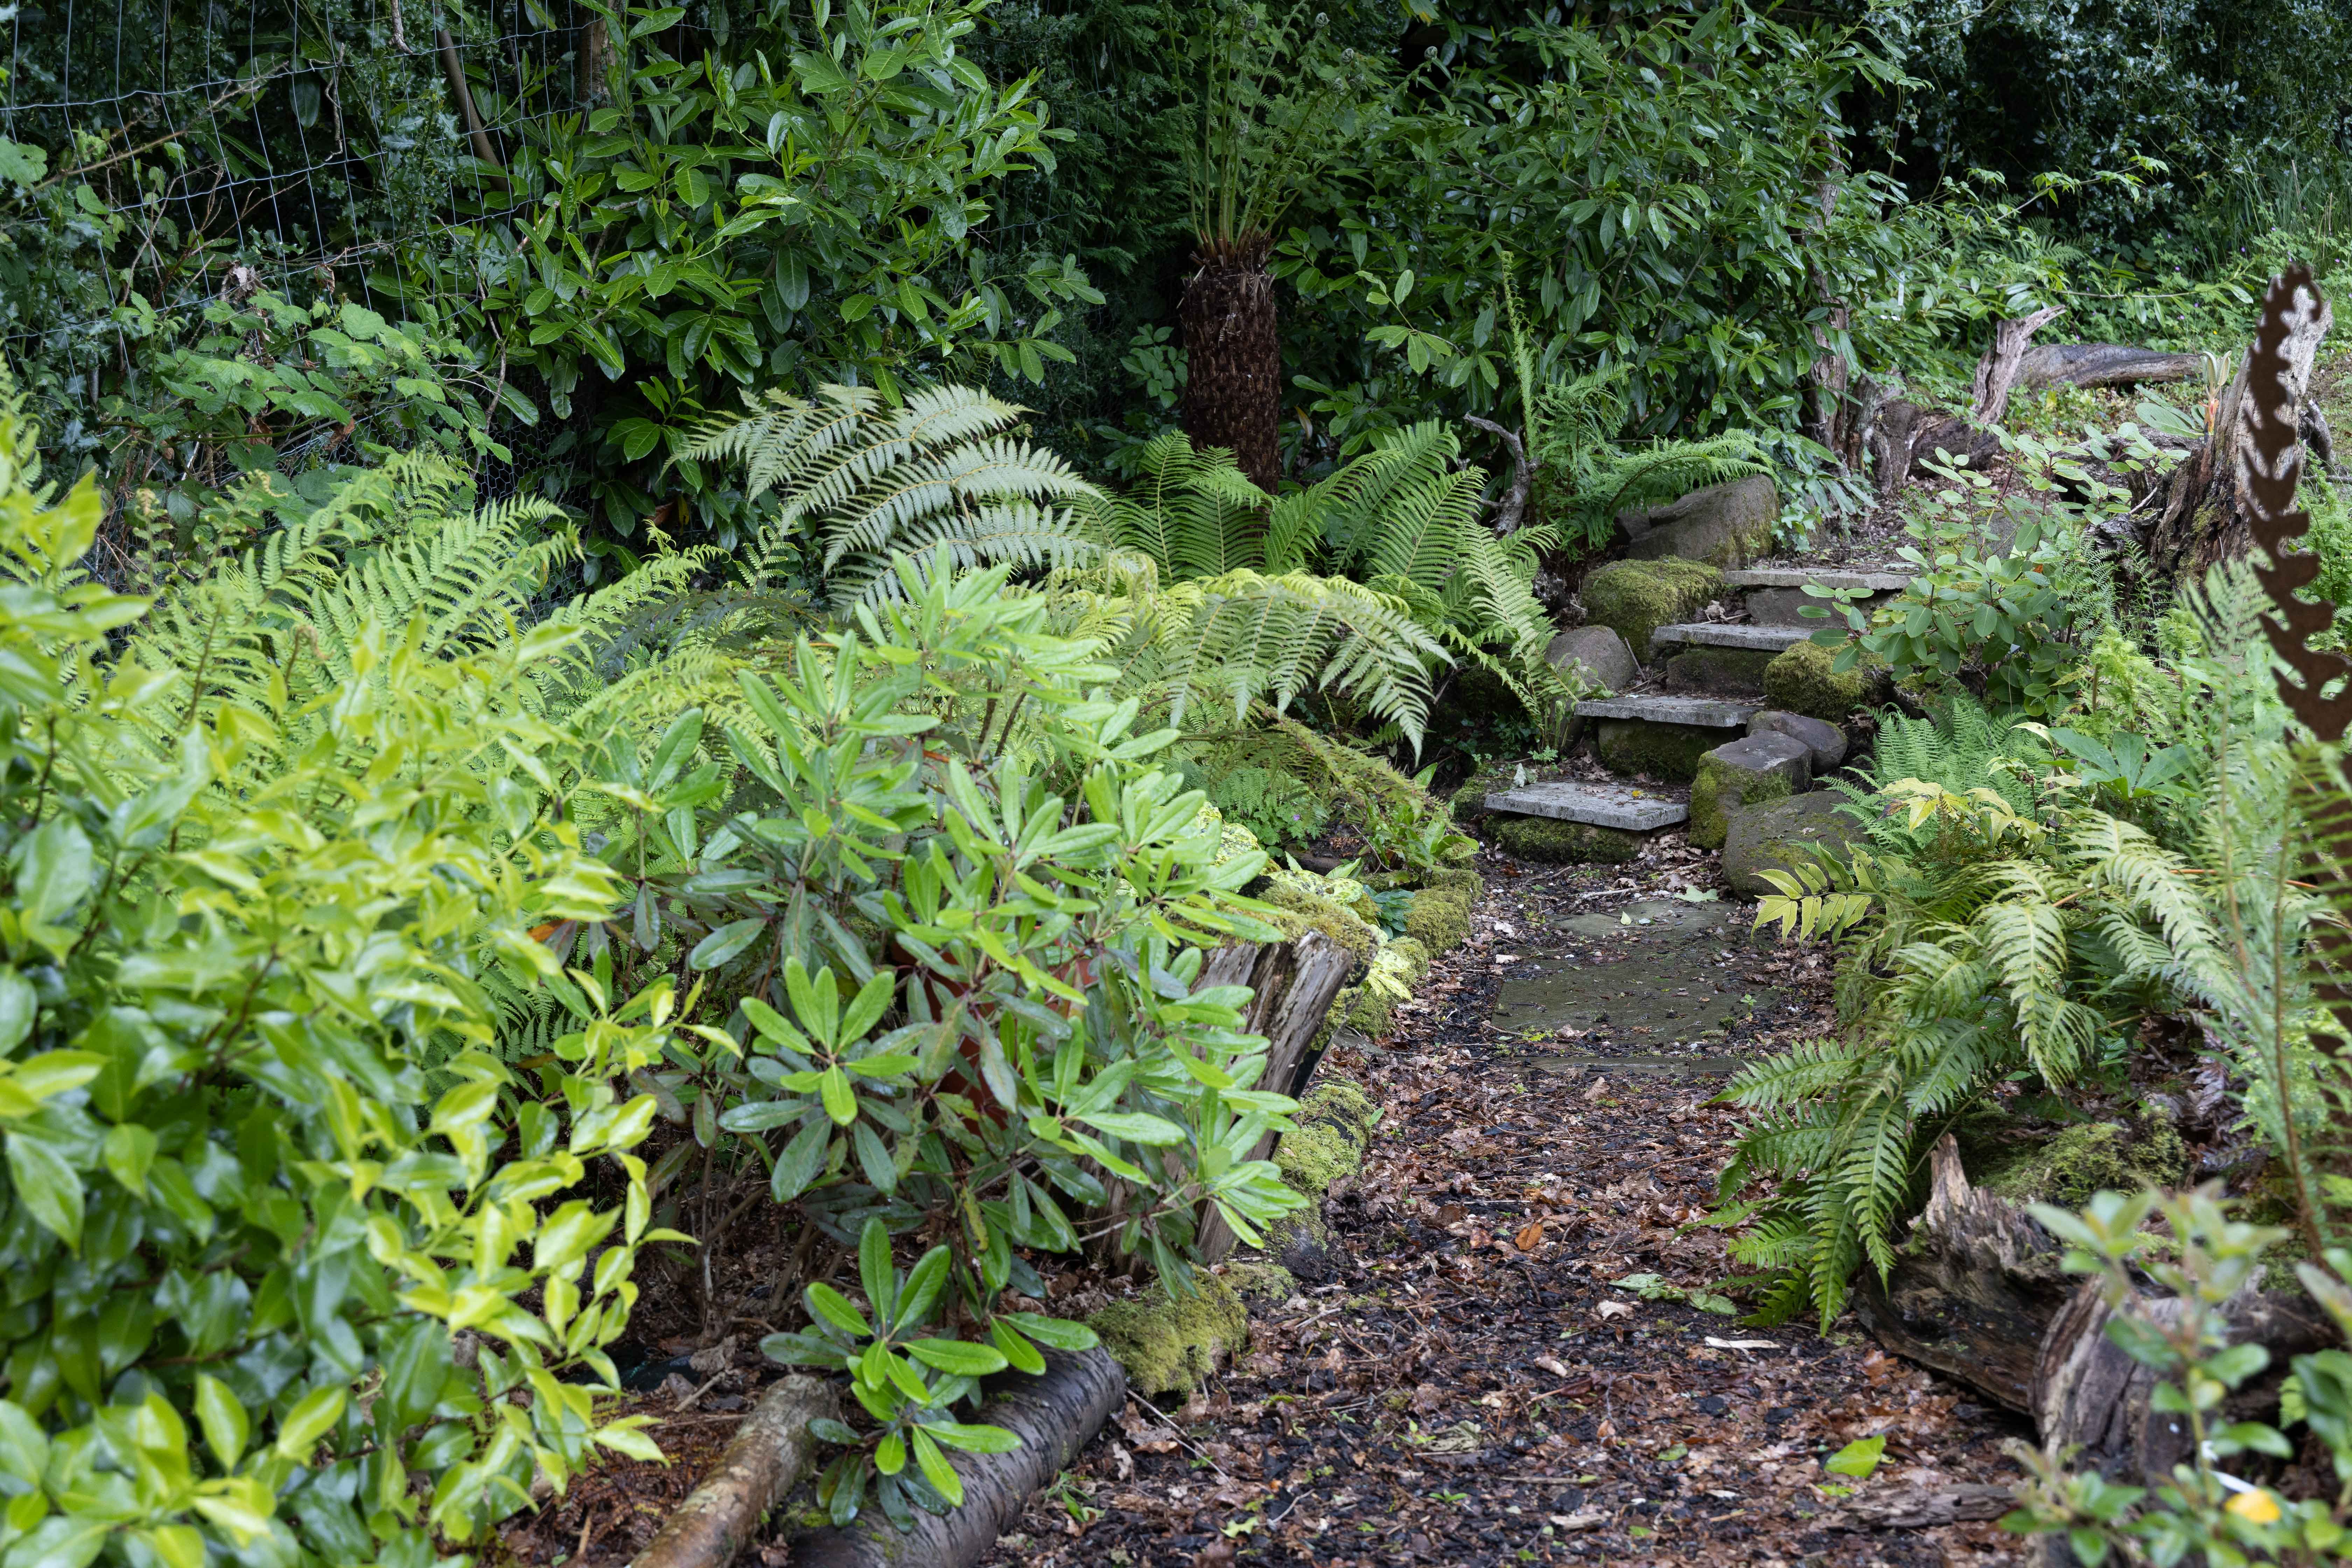 View of the Fernery